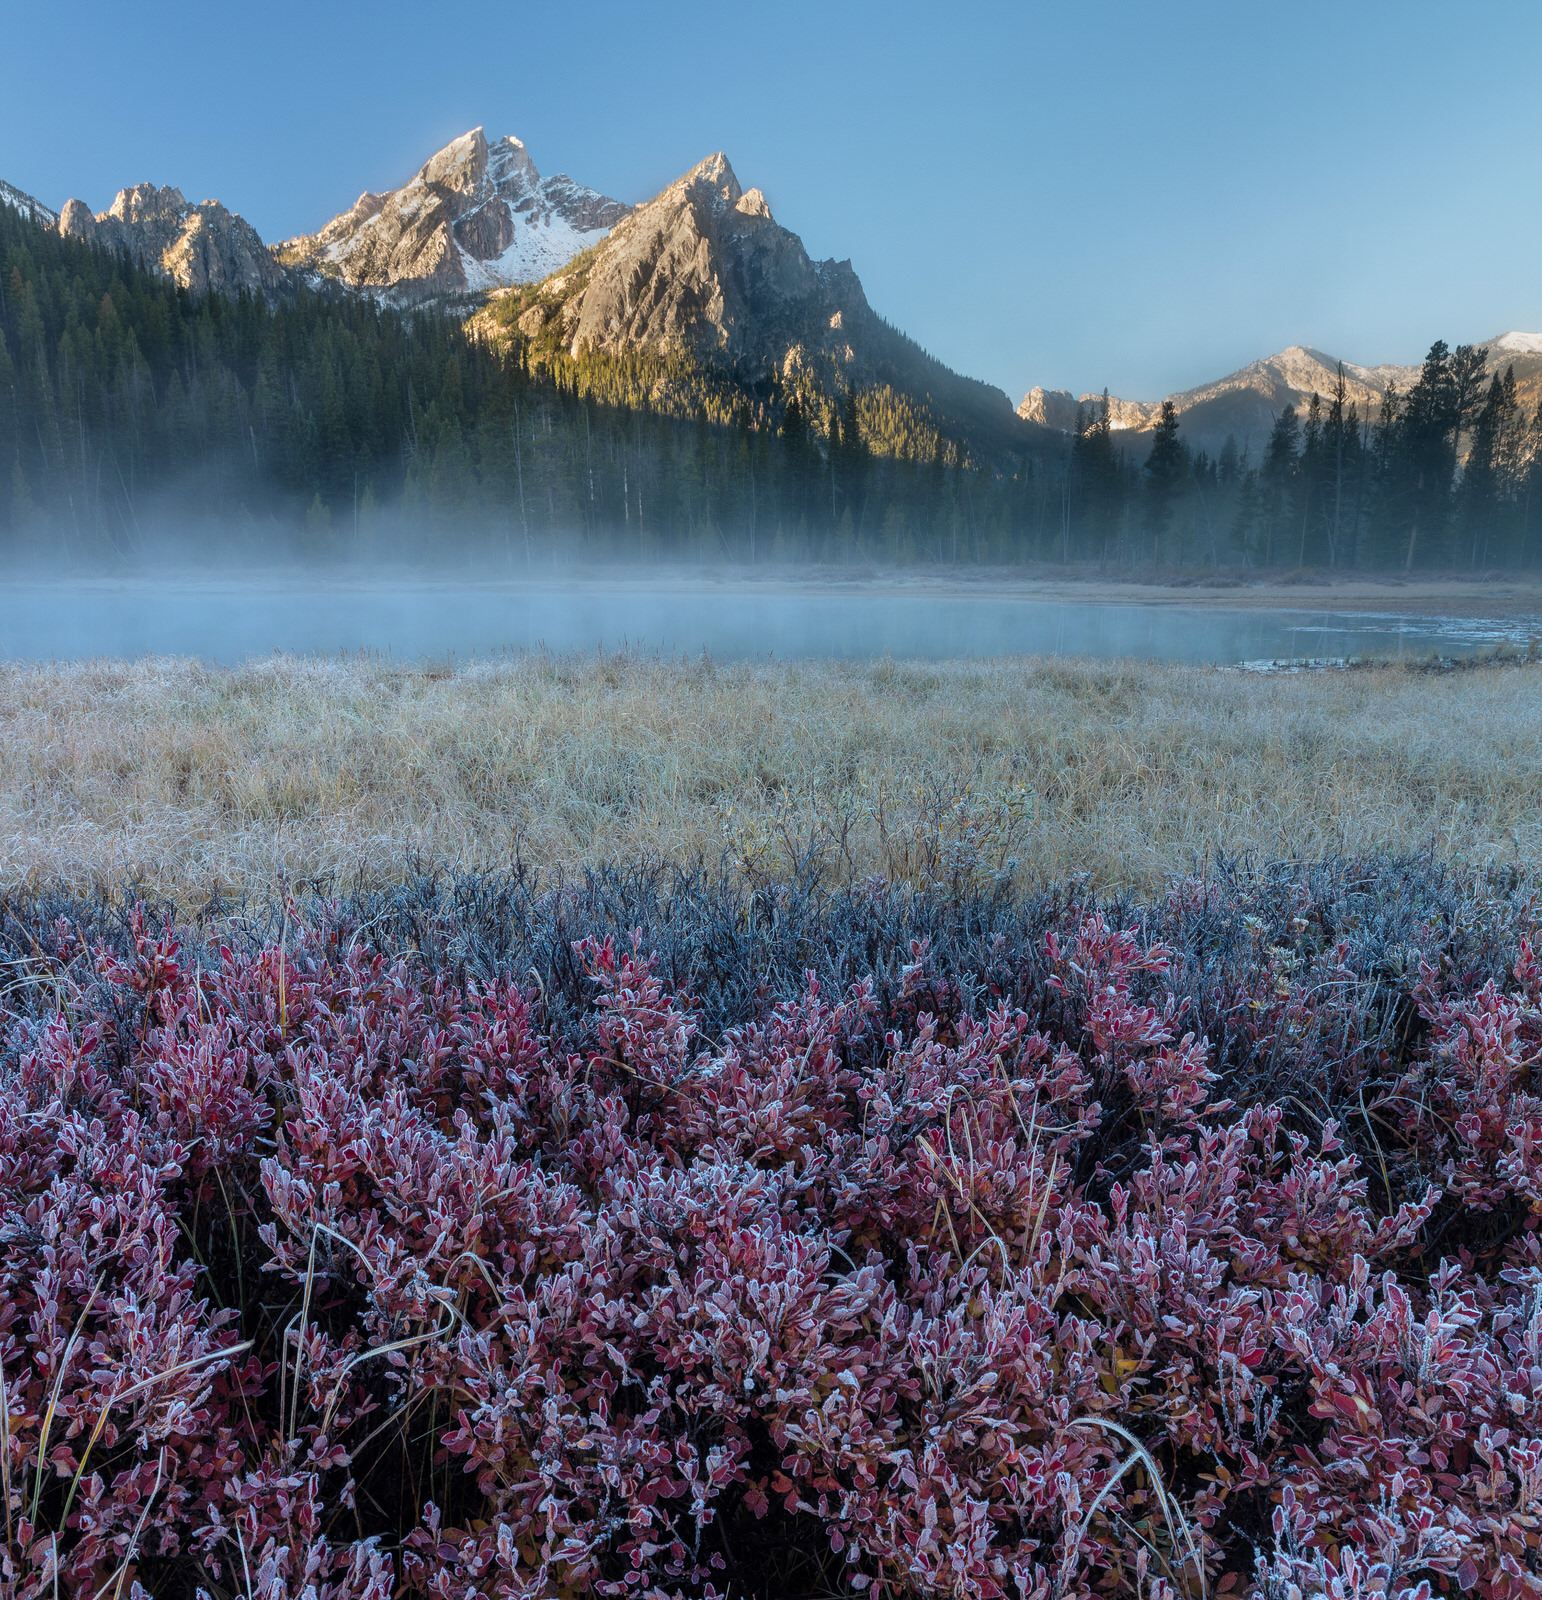  Mount McGowan rises behind the huckleberry and marsh grass near Stanley Lake, Idaho 